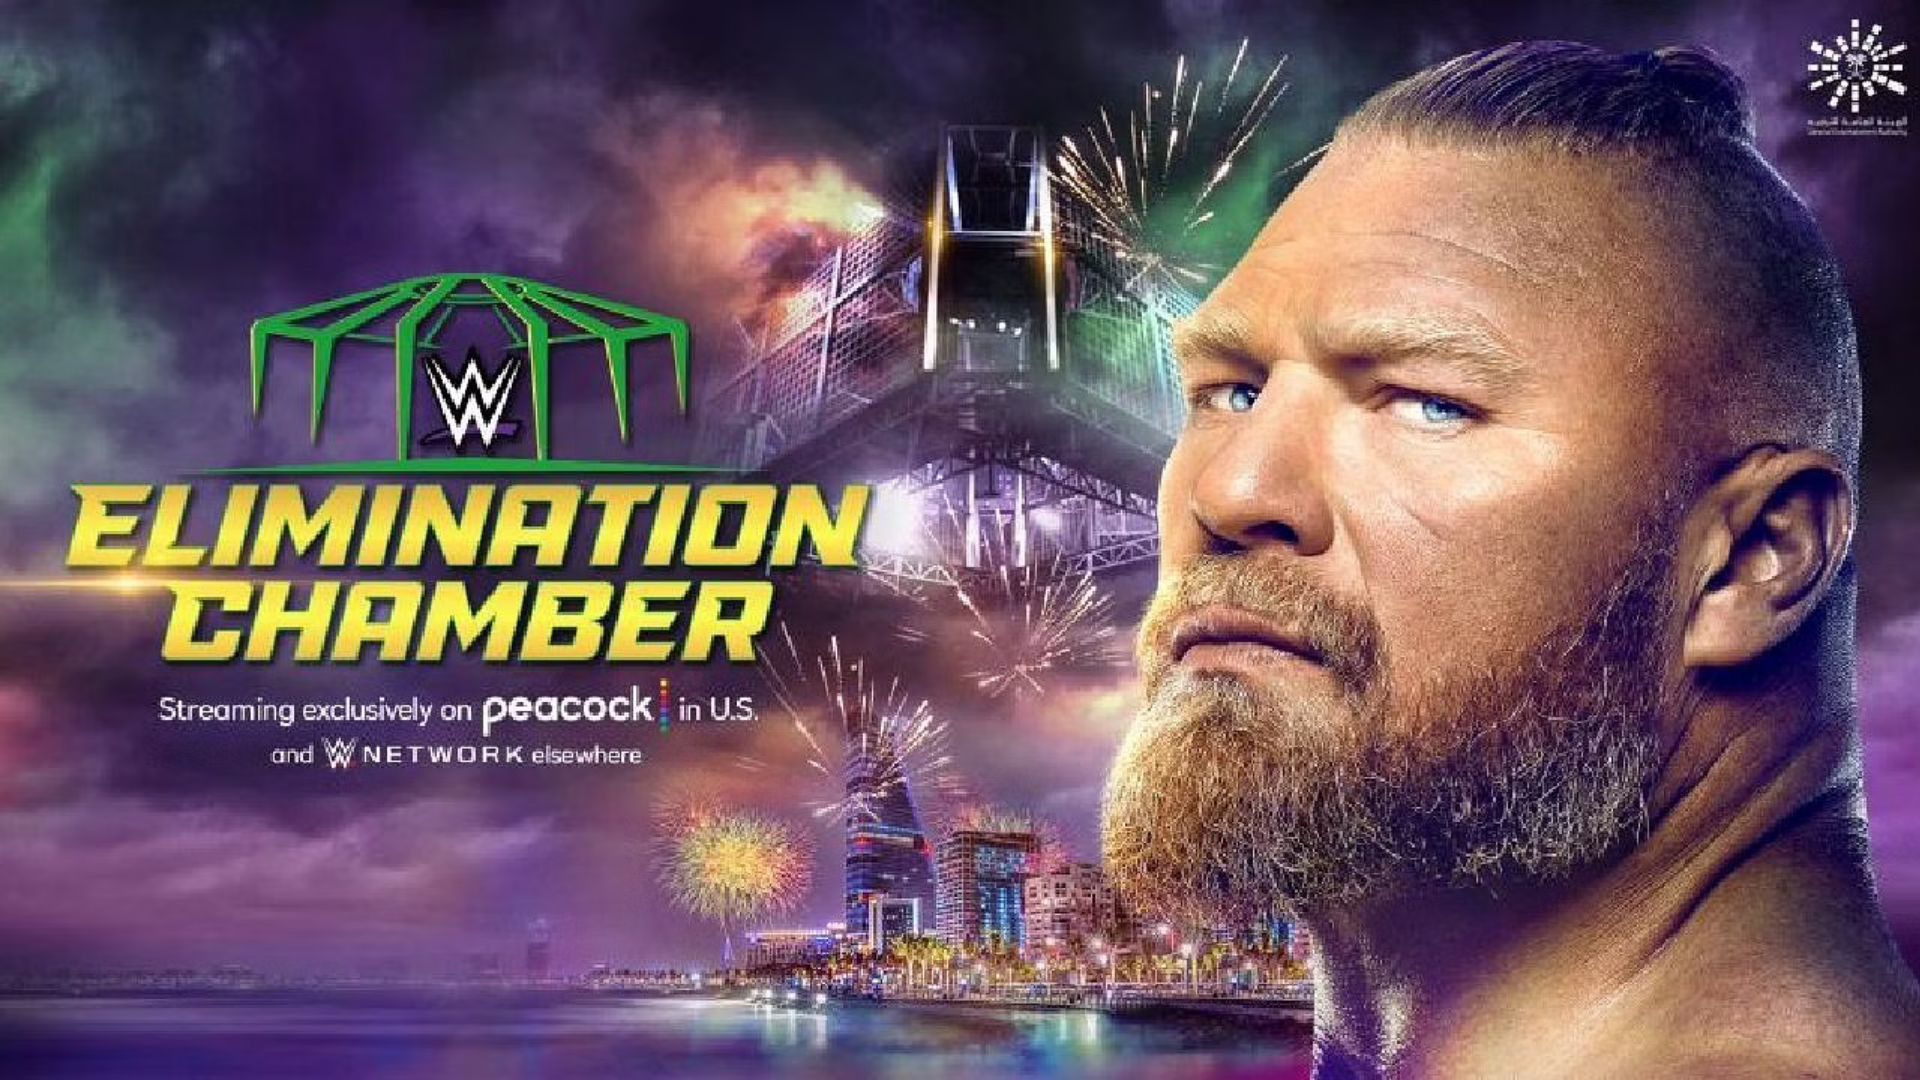 What a stupendous night of wrestling at WWE Elimination Chamber!